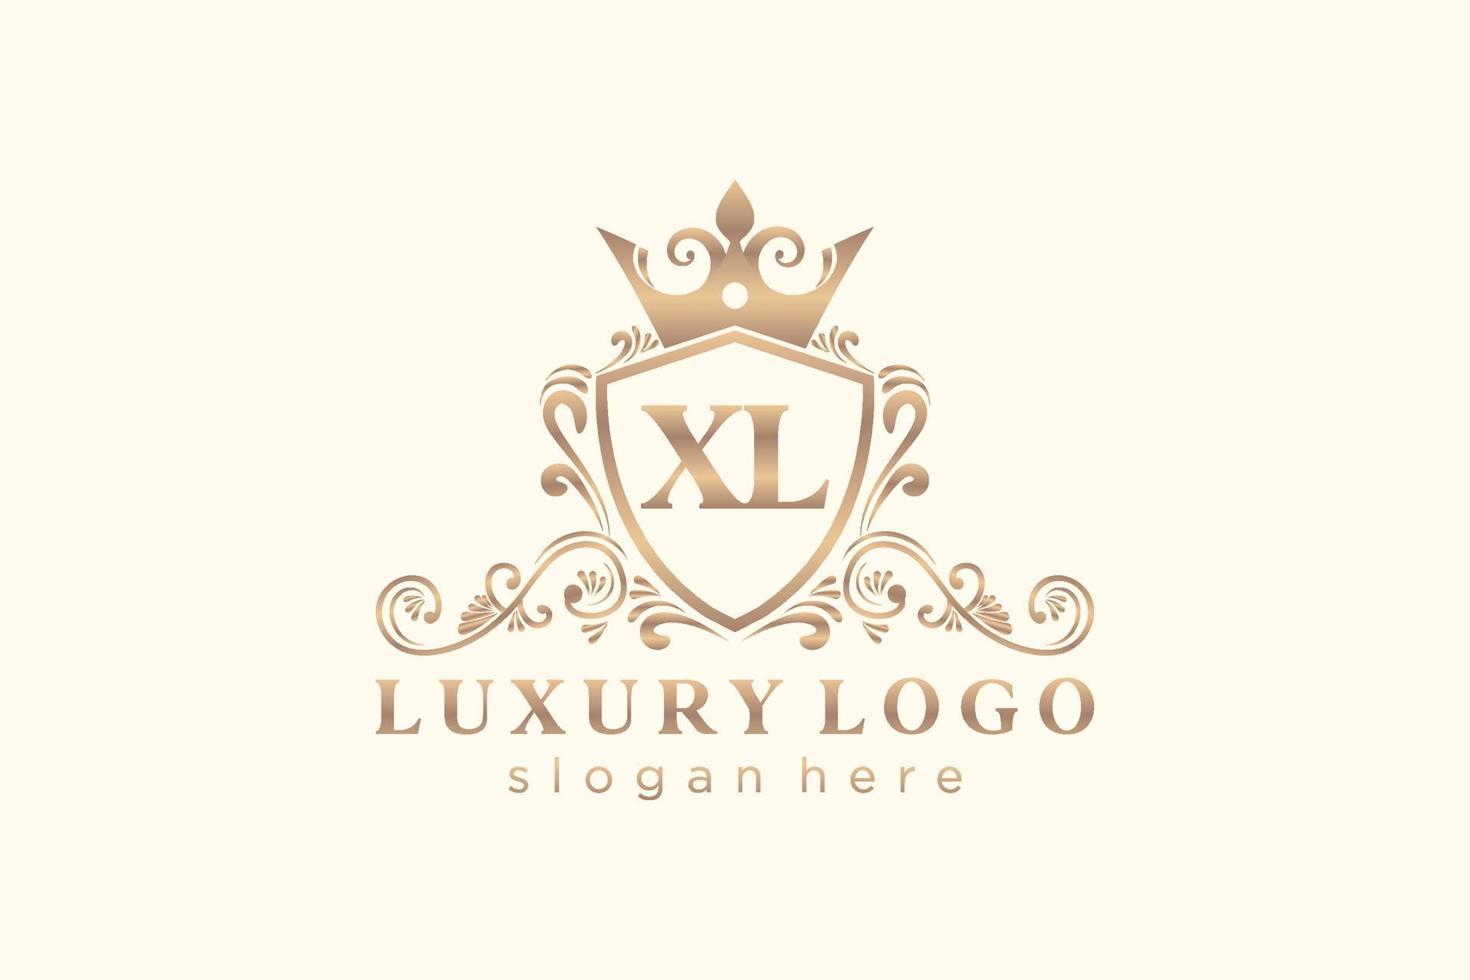 Initial XL Letter Royal Luxury Logo template in vector art for Restaurant, Royalty, Boutique, Cafe, Hotel, Heraldic, Jewelry, Fashion and other vector illustration.